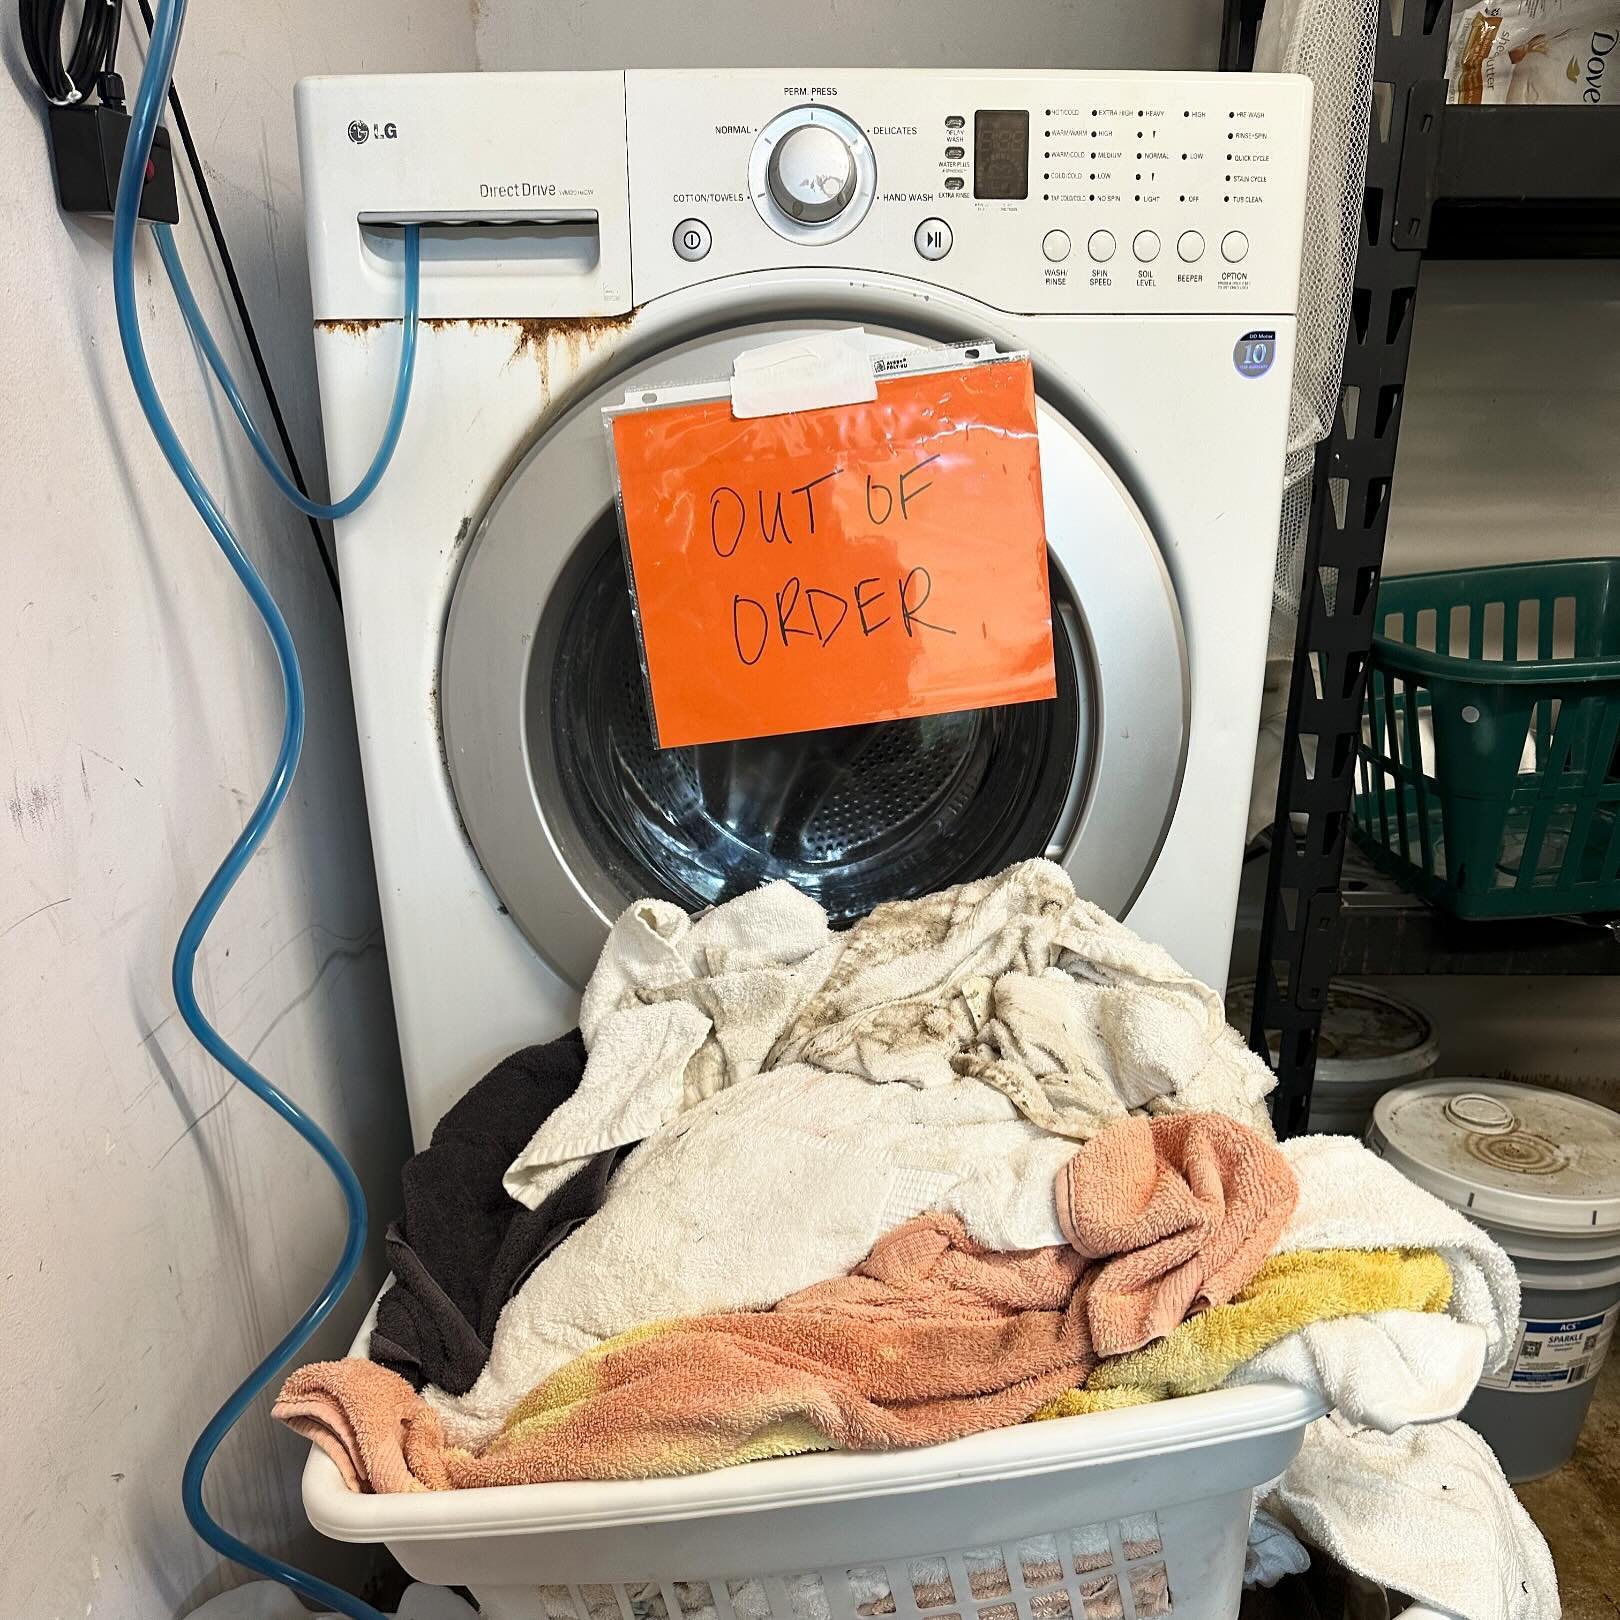 🚨 URGENT REQUEST 🚨 Our washing machine that provides clean towels for hundreds of clients through our free shower service each week is broken beyond repair 😩 We are in desperate need of replacement ASAP. Please share this donation request far &amp